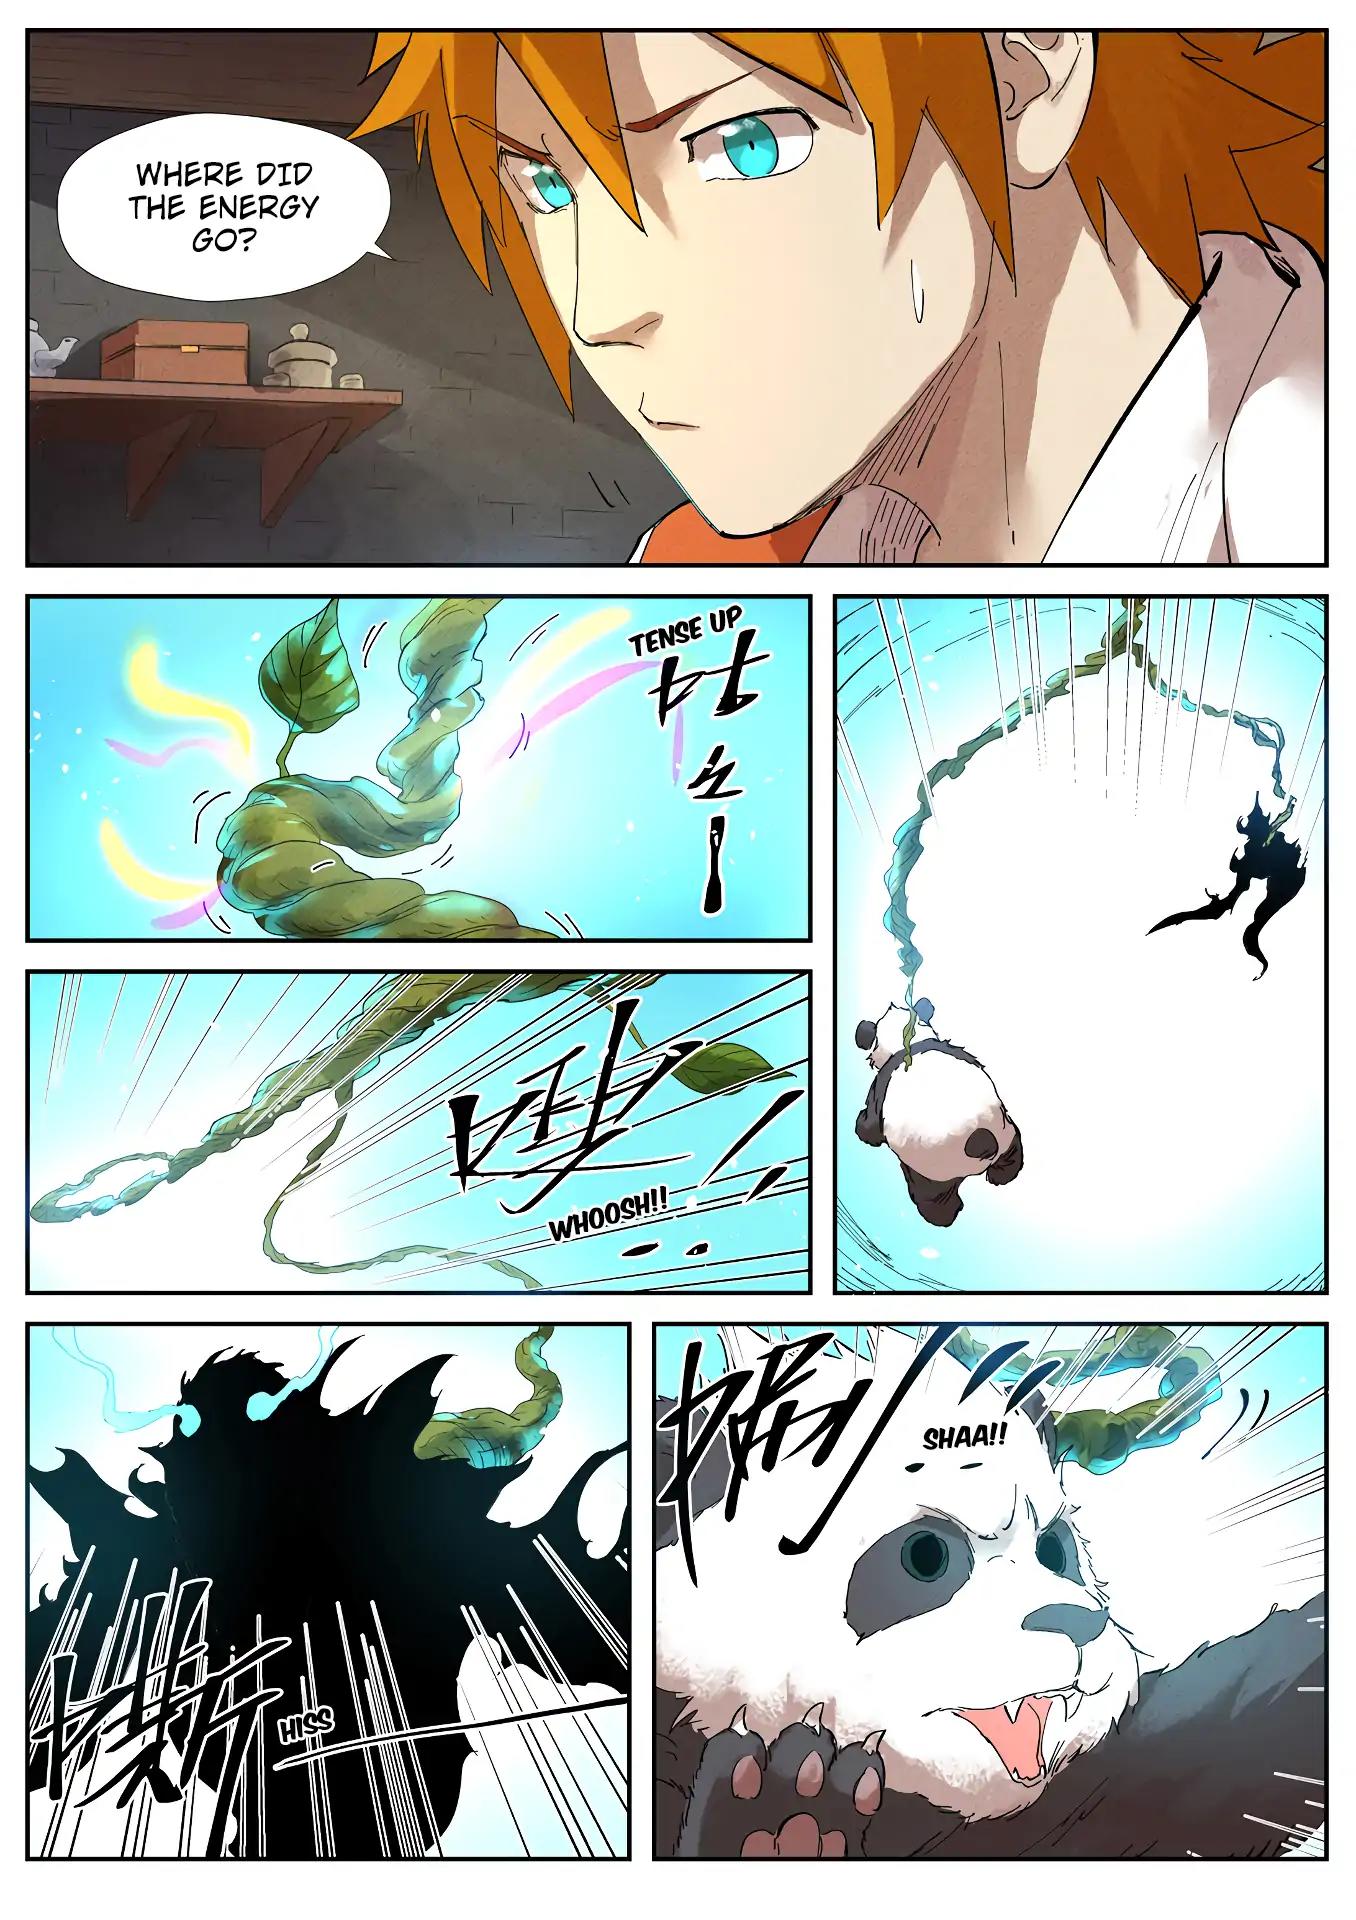 Tales of Demons and Gods Chapter 233.5: